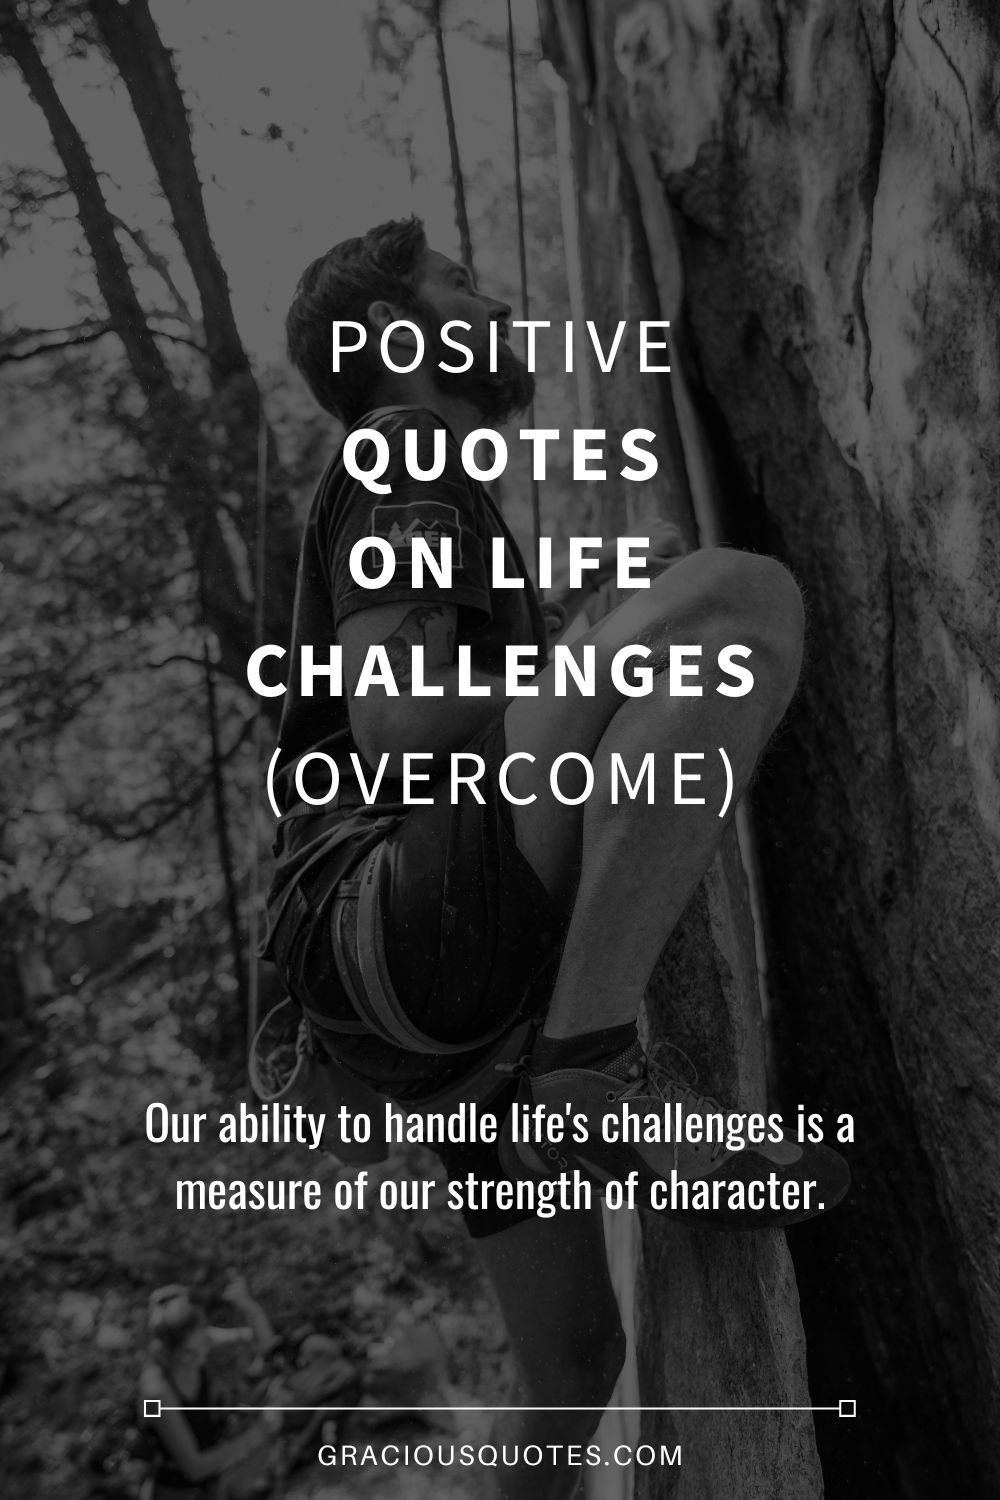 77 Positive Quotes on Life Challenges (OVERCOME)